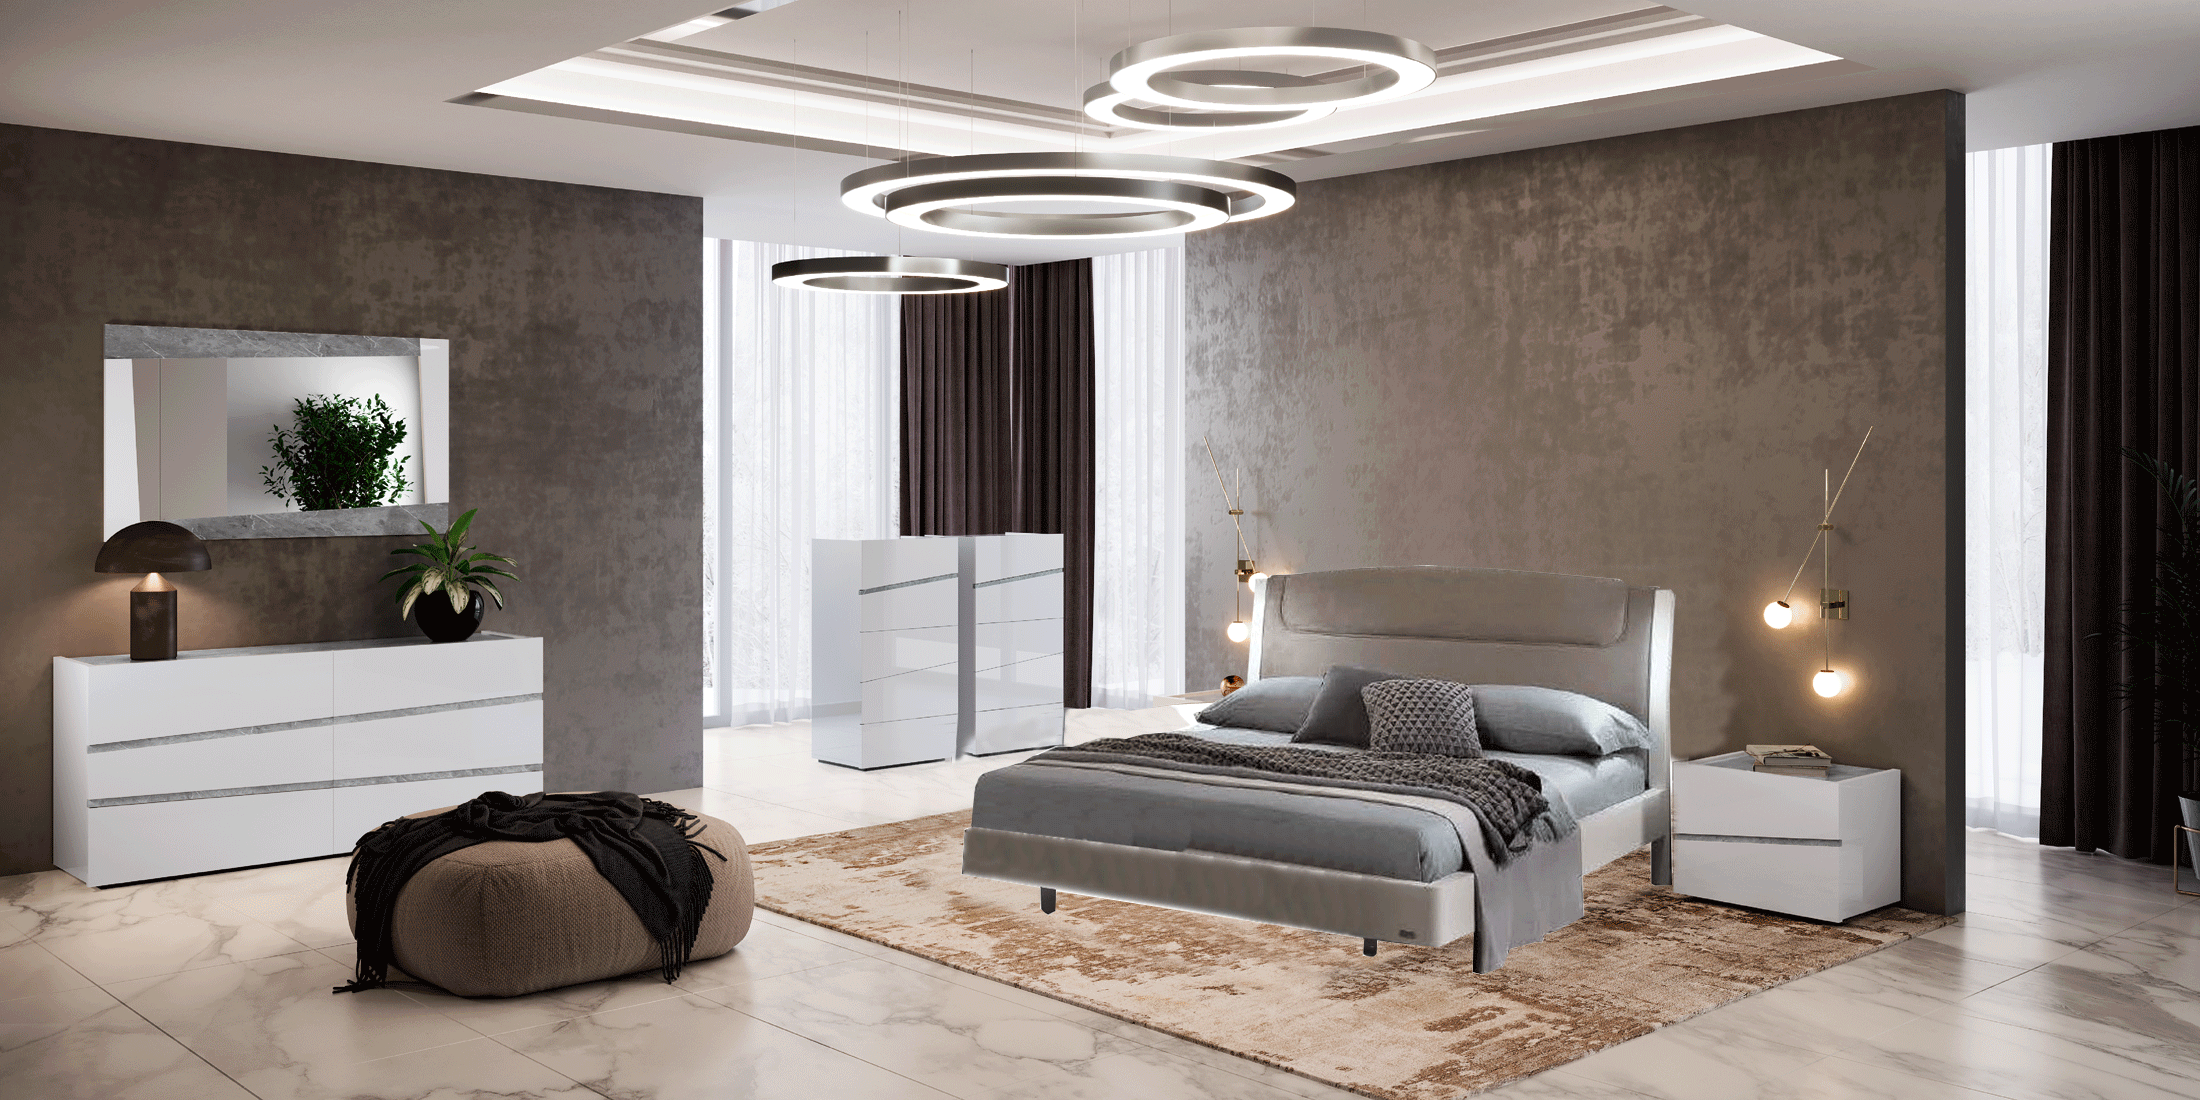 Brands Arredoclassic Bedroom, Italy Luna White Bed with Alba cases, Only bed is on sale